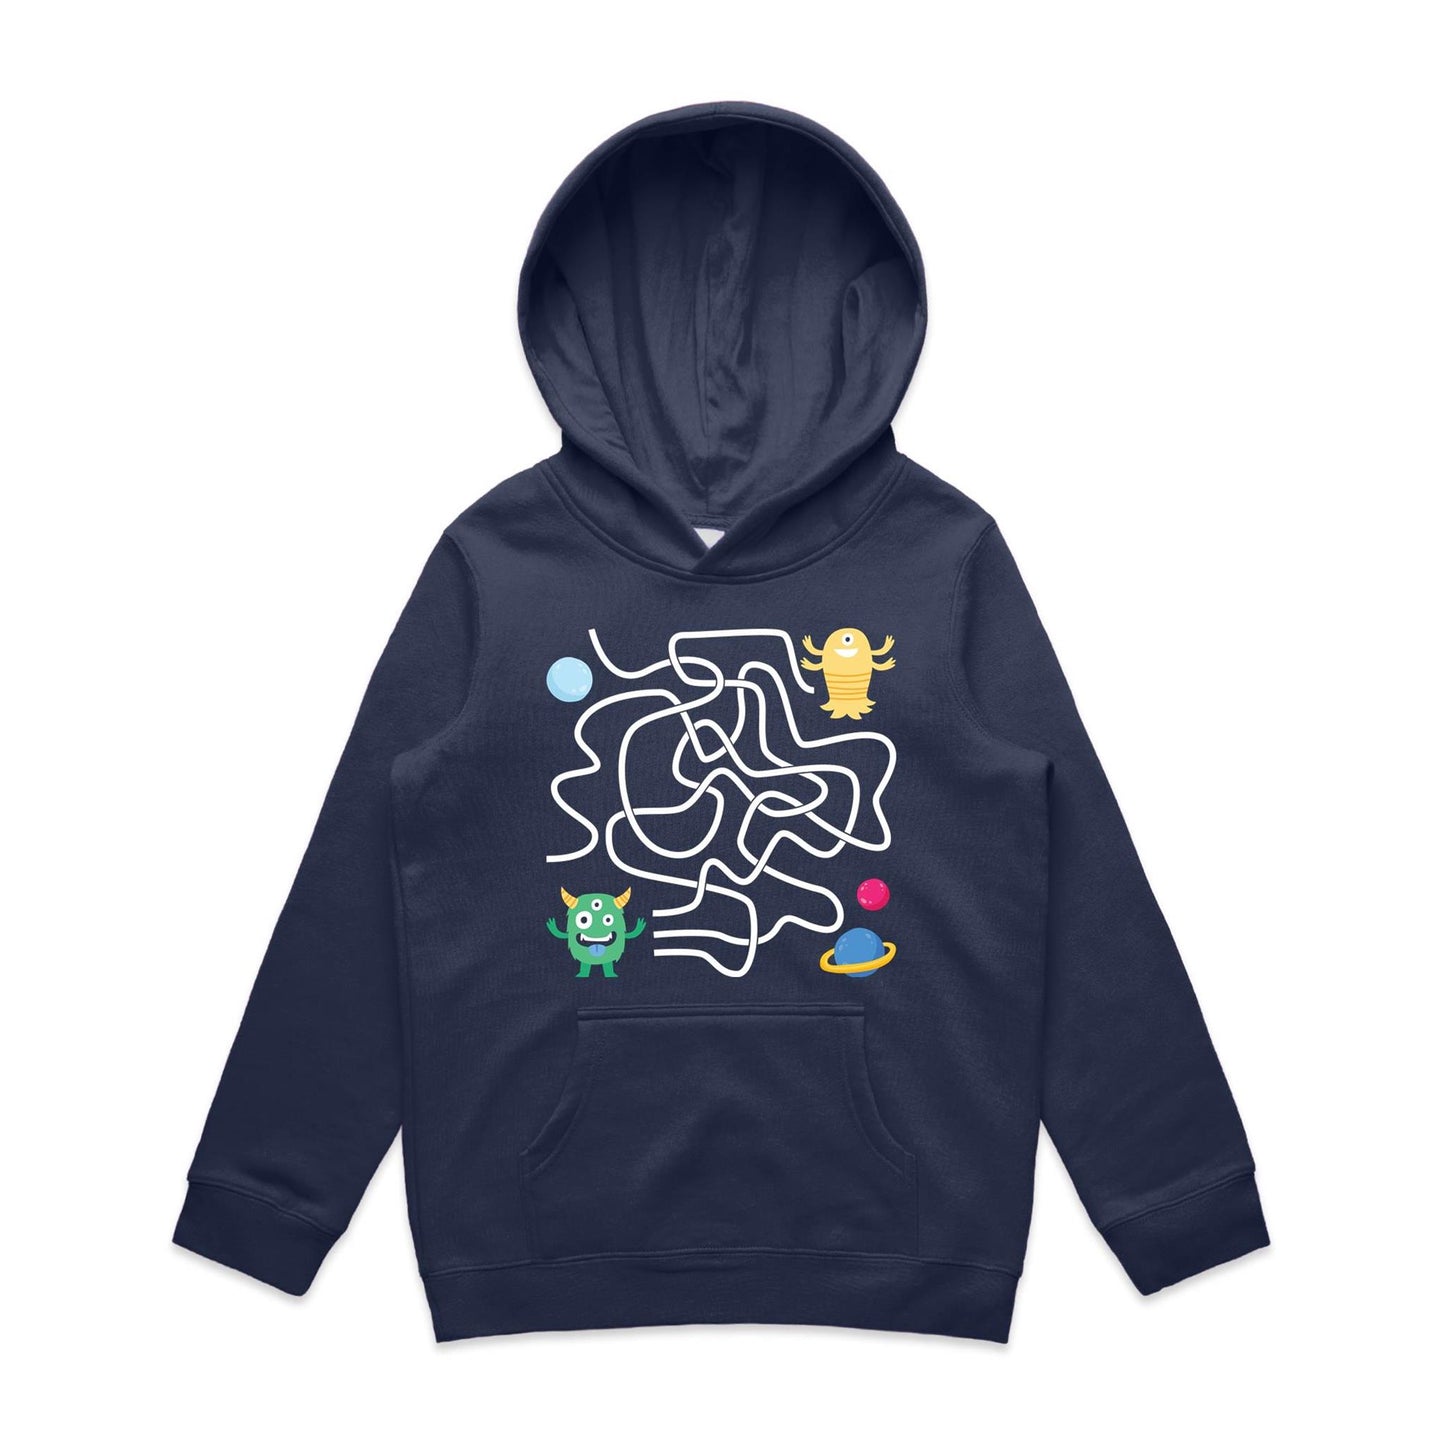 Find The Right Path, Space Alien - Youth Supply Hood Midnight Blue Kids Hoodie Sci Fi Space